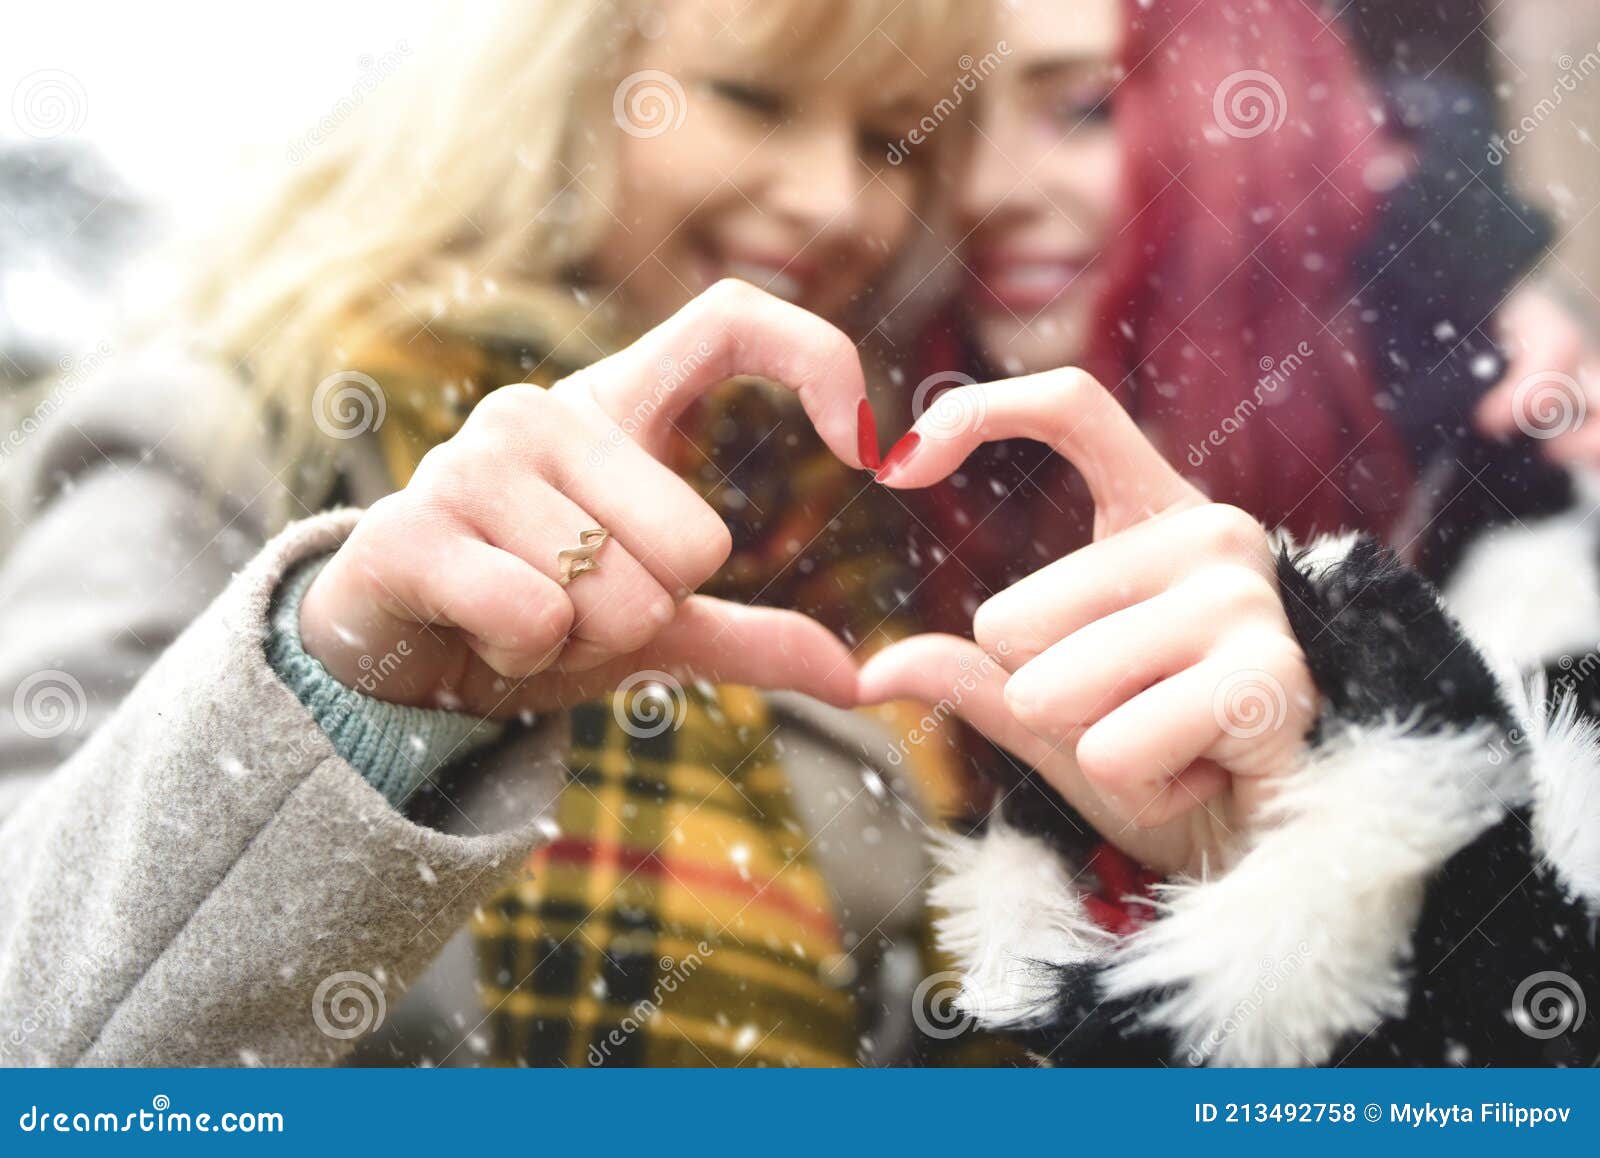 Lesbian Couple Making Heart with Hands, Open Relationship in Same-sex Love